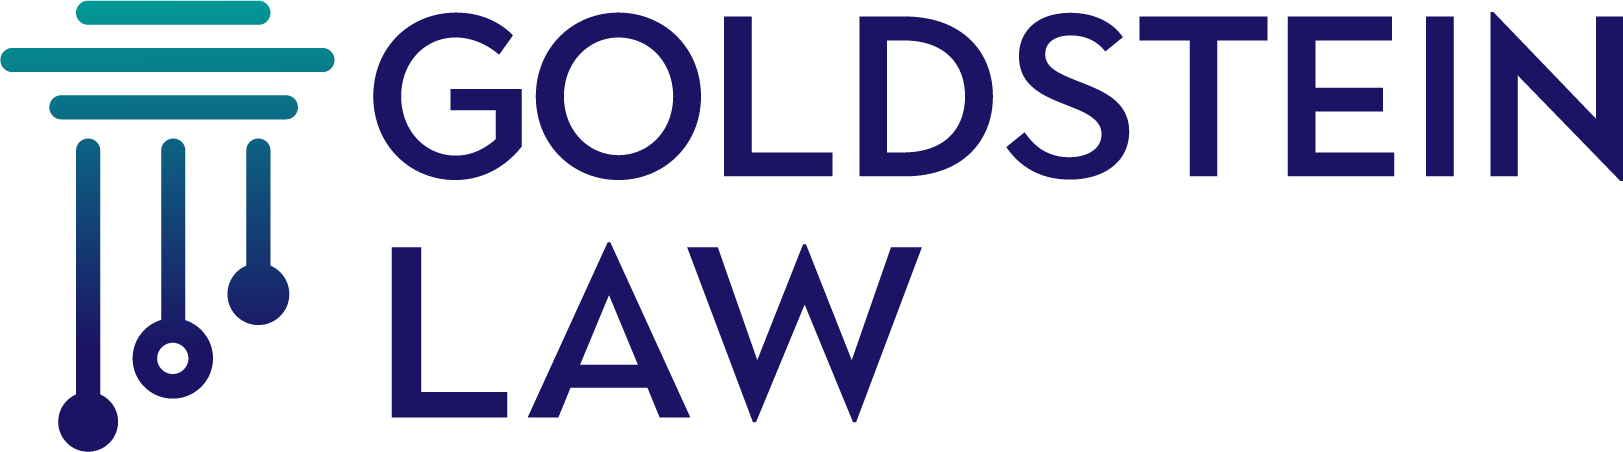 Goldstein Law is a technology-focused web3-powered law firm based in Colorado.